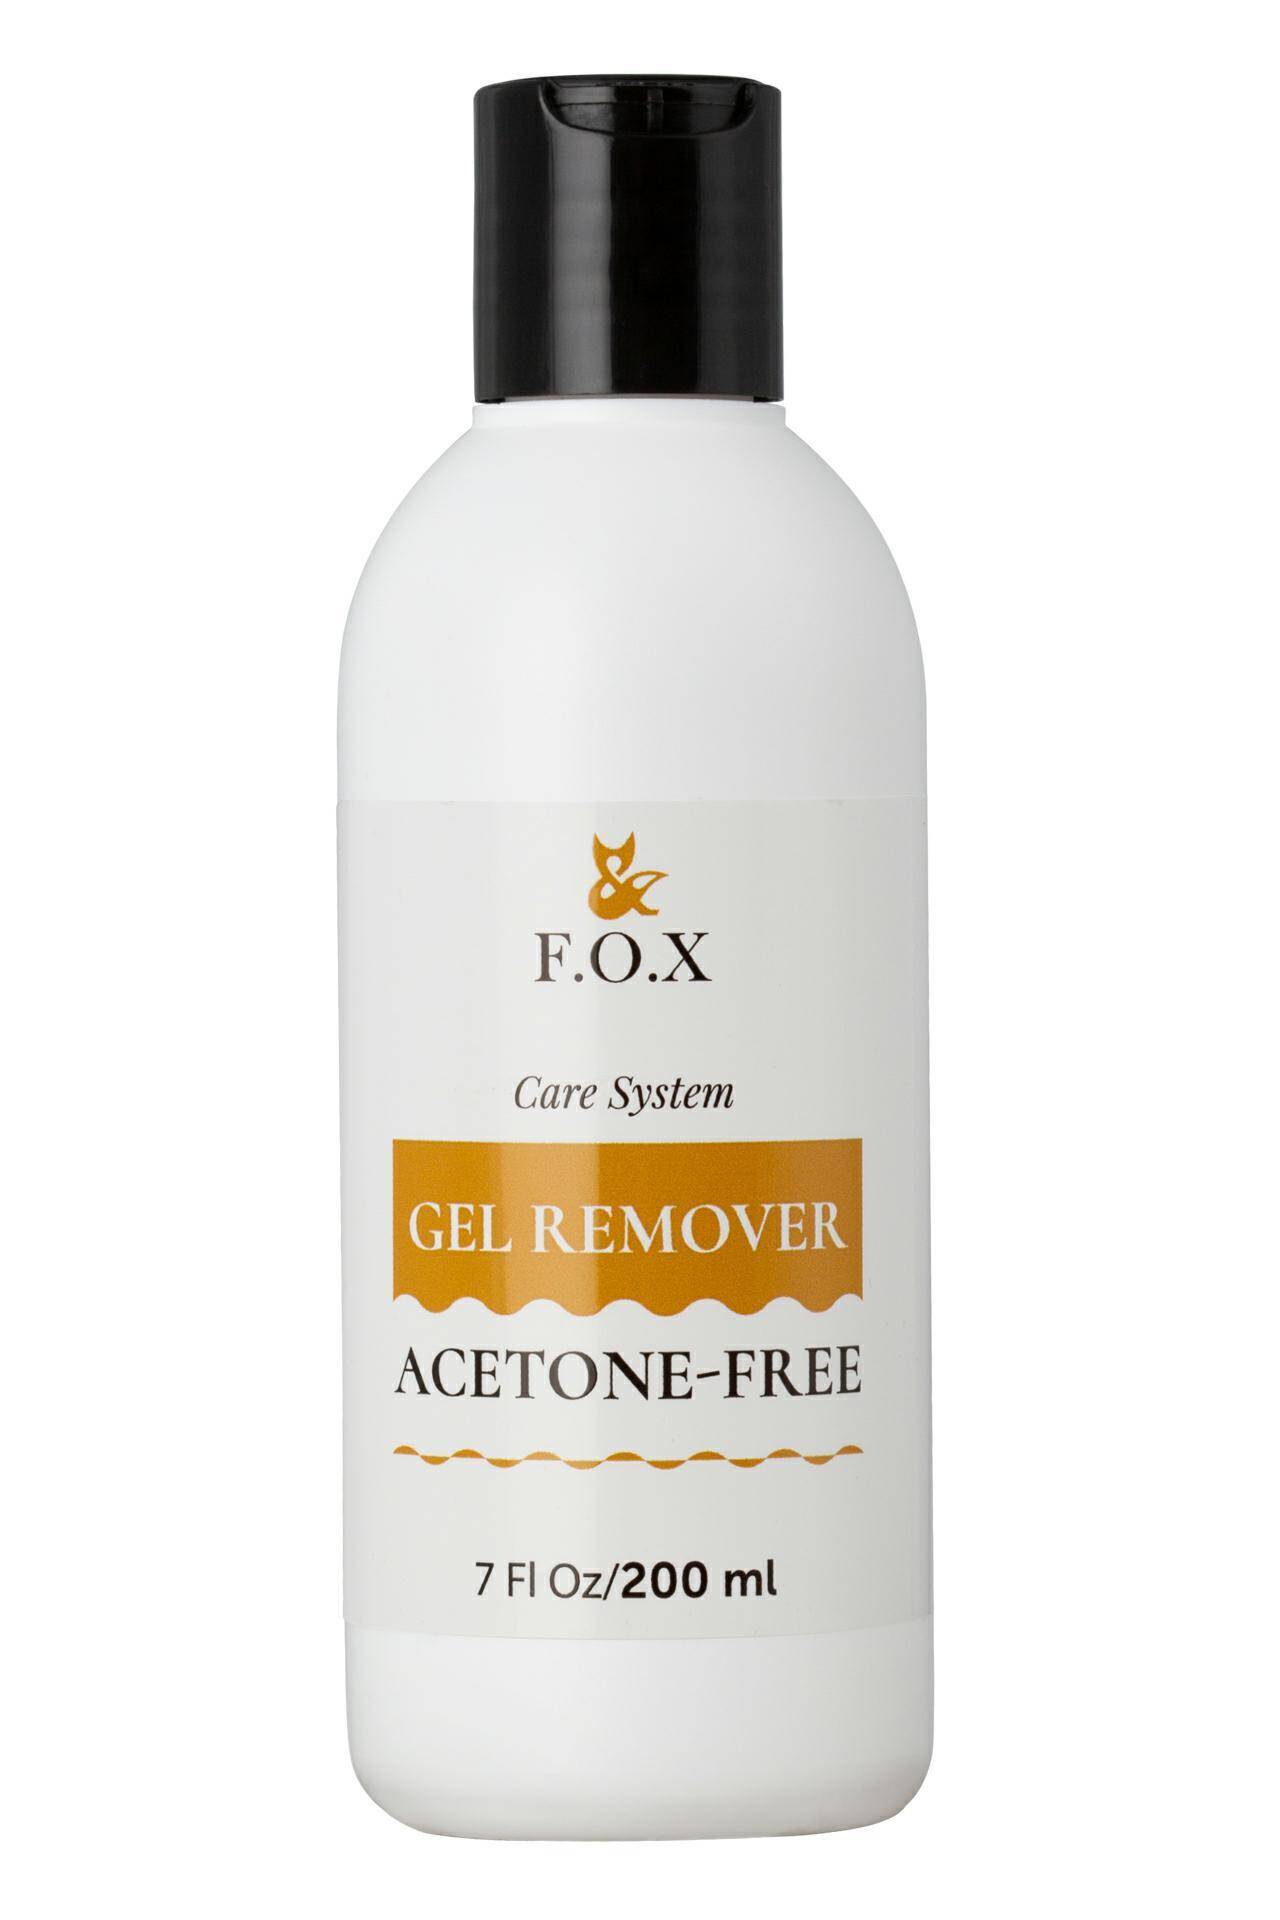 FOX Care system Gel Remover ACETONE-FREE